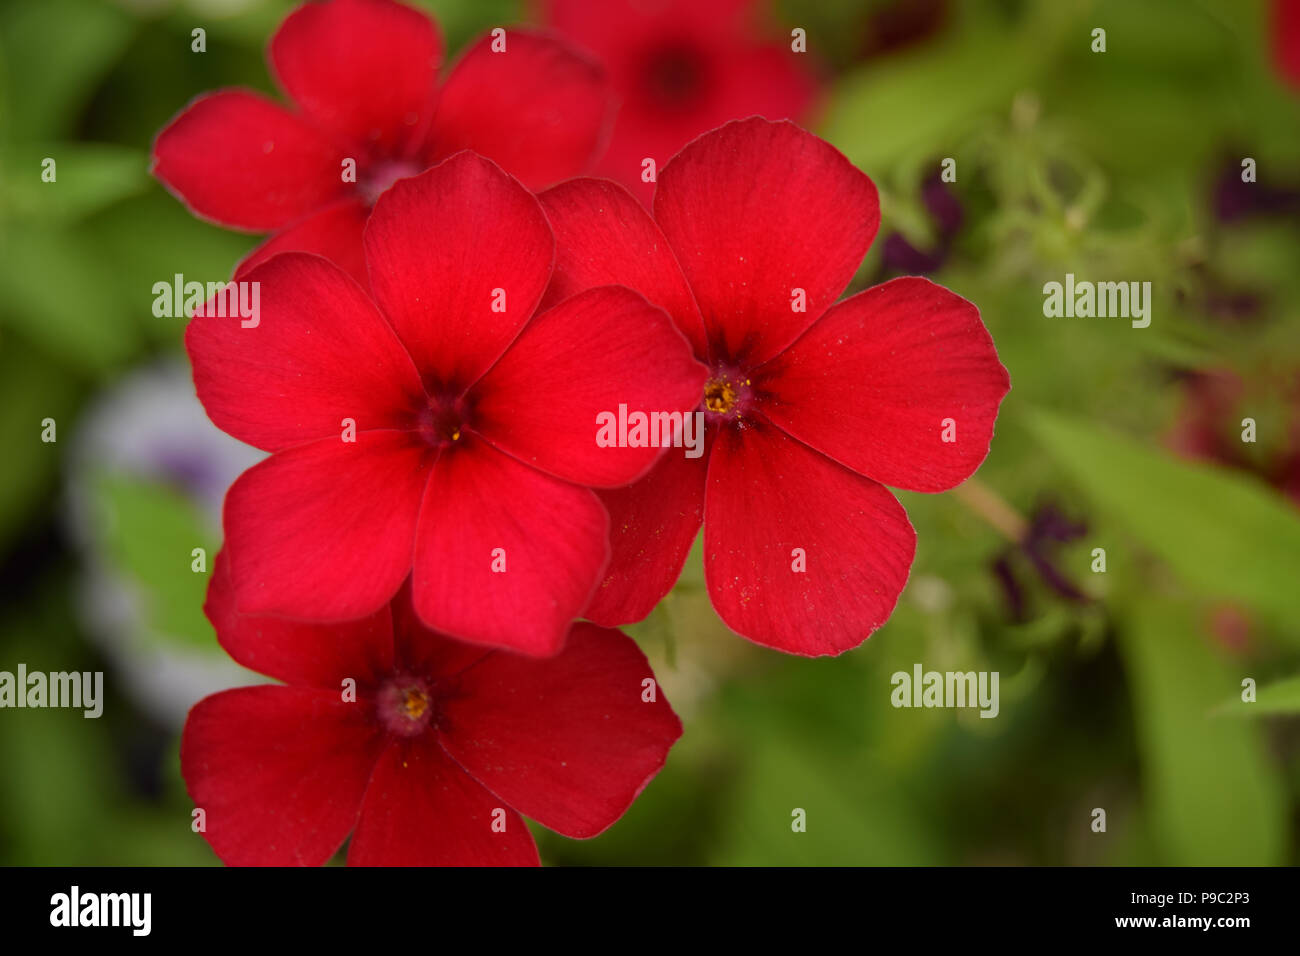 Red Phlox Flowers On Background Of Green Foliage Stock Photo